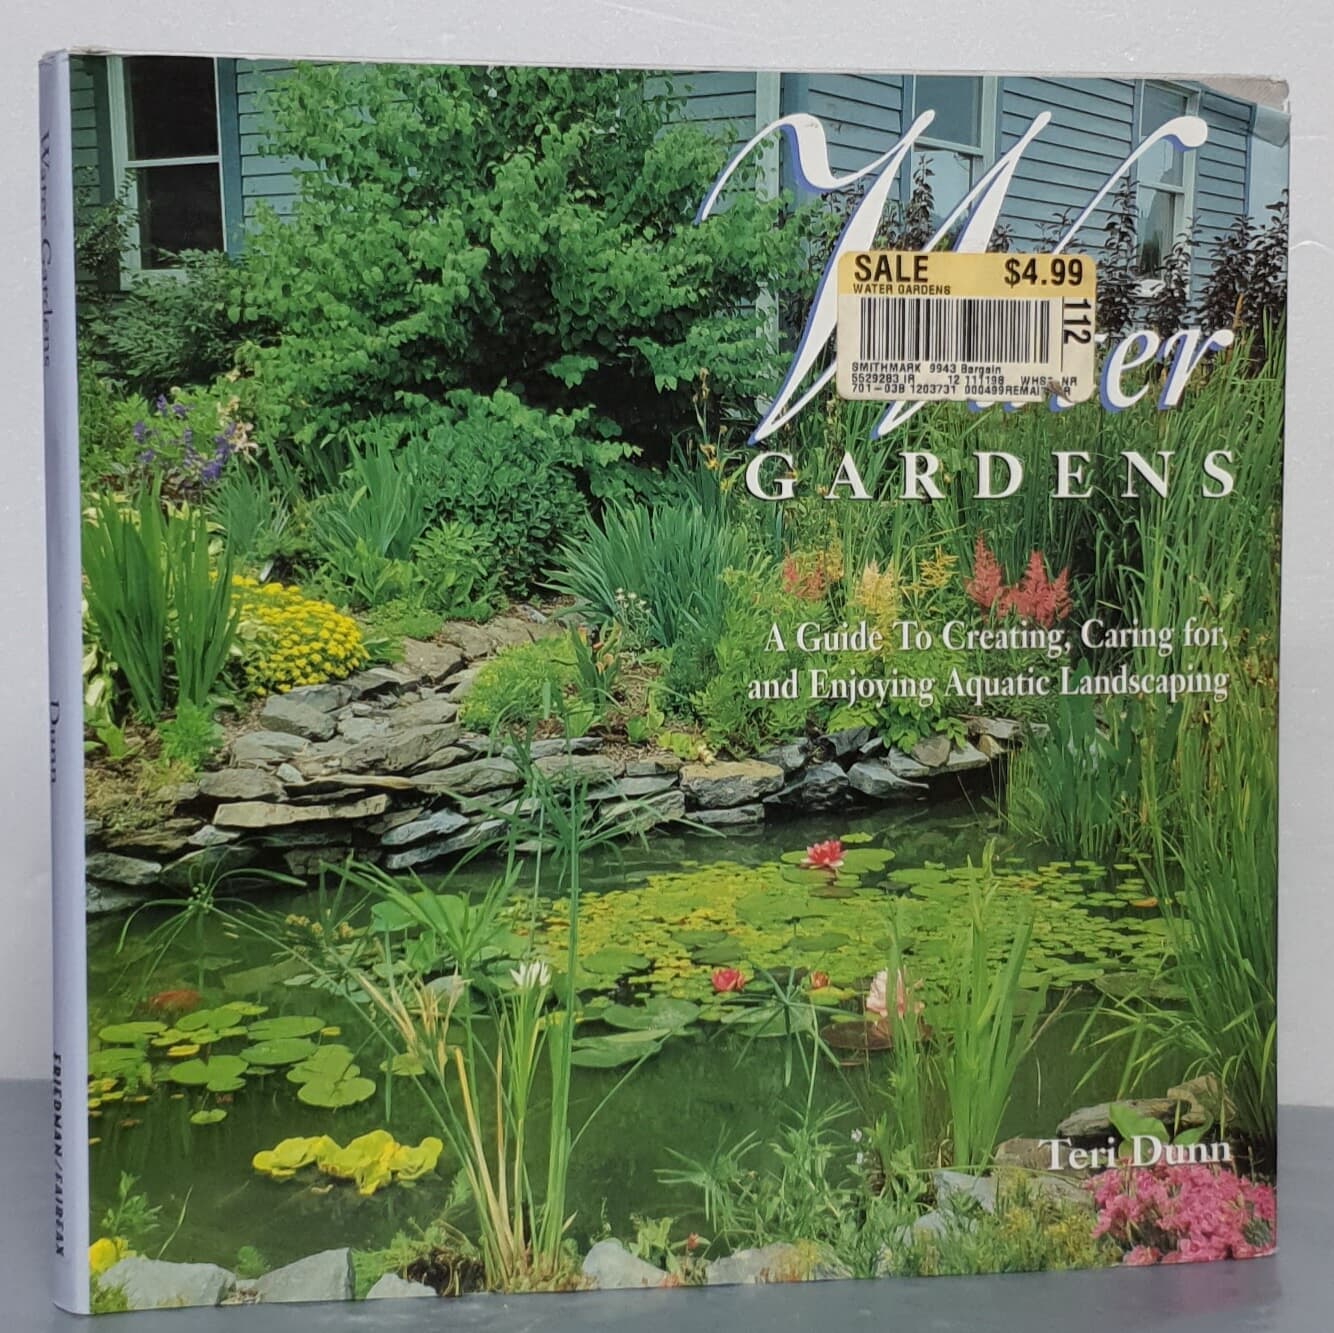 Water Gardens - A Guide To Creating, Caring for, and Enjoying Aquatic Landscaping